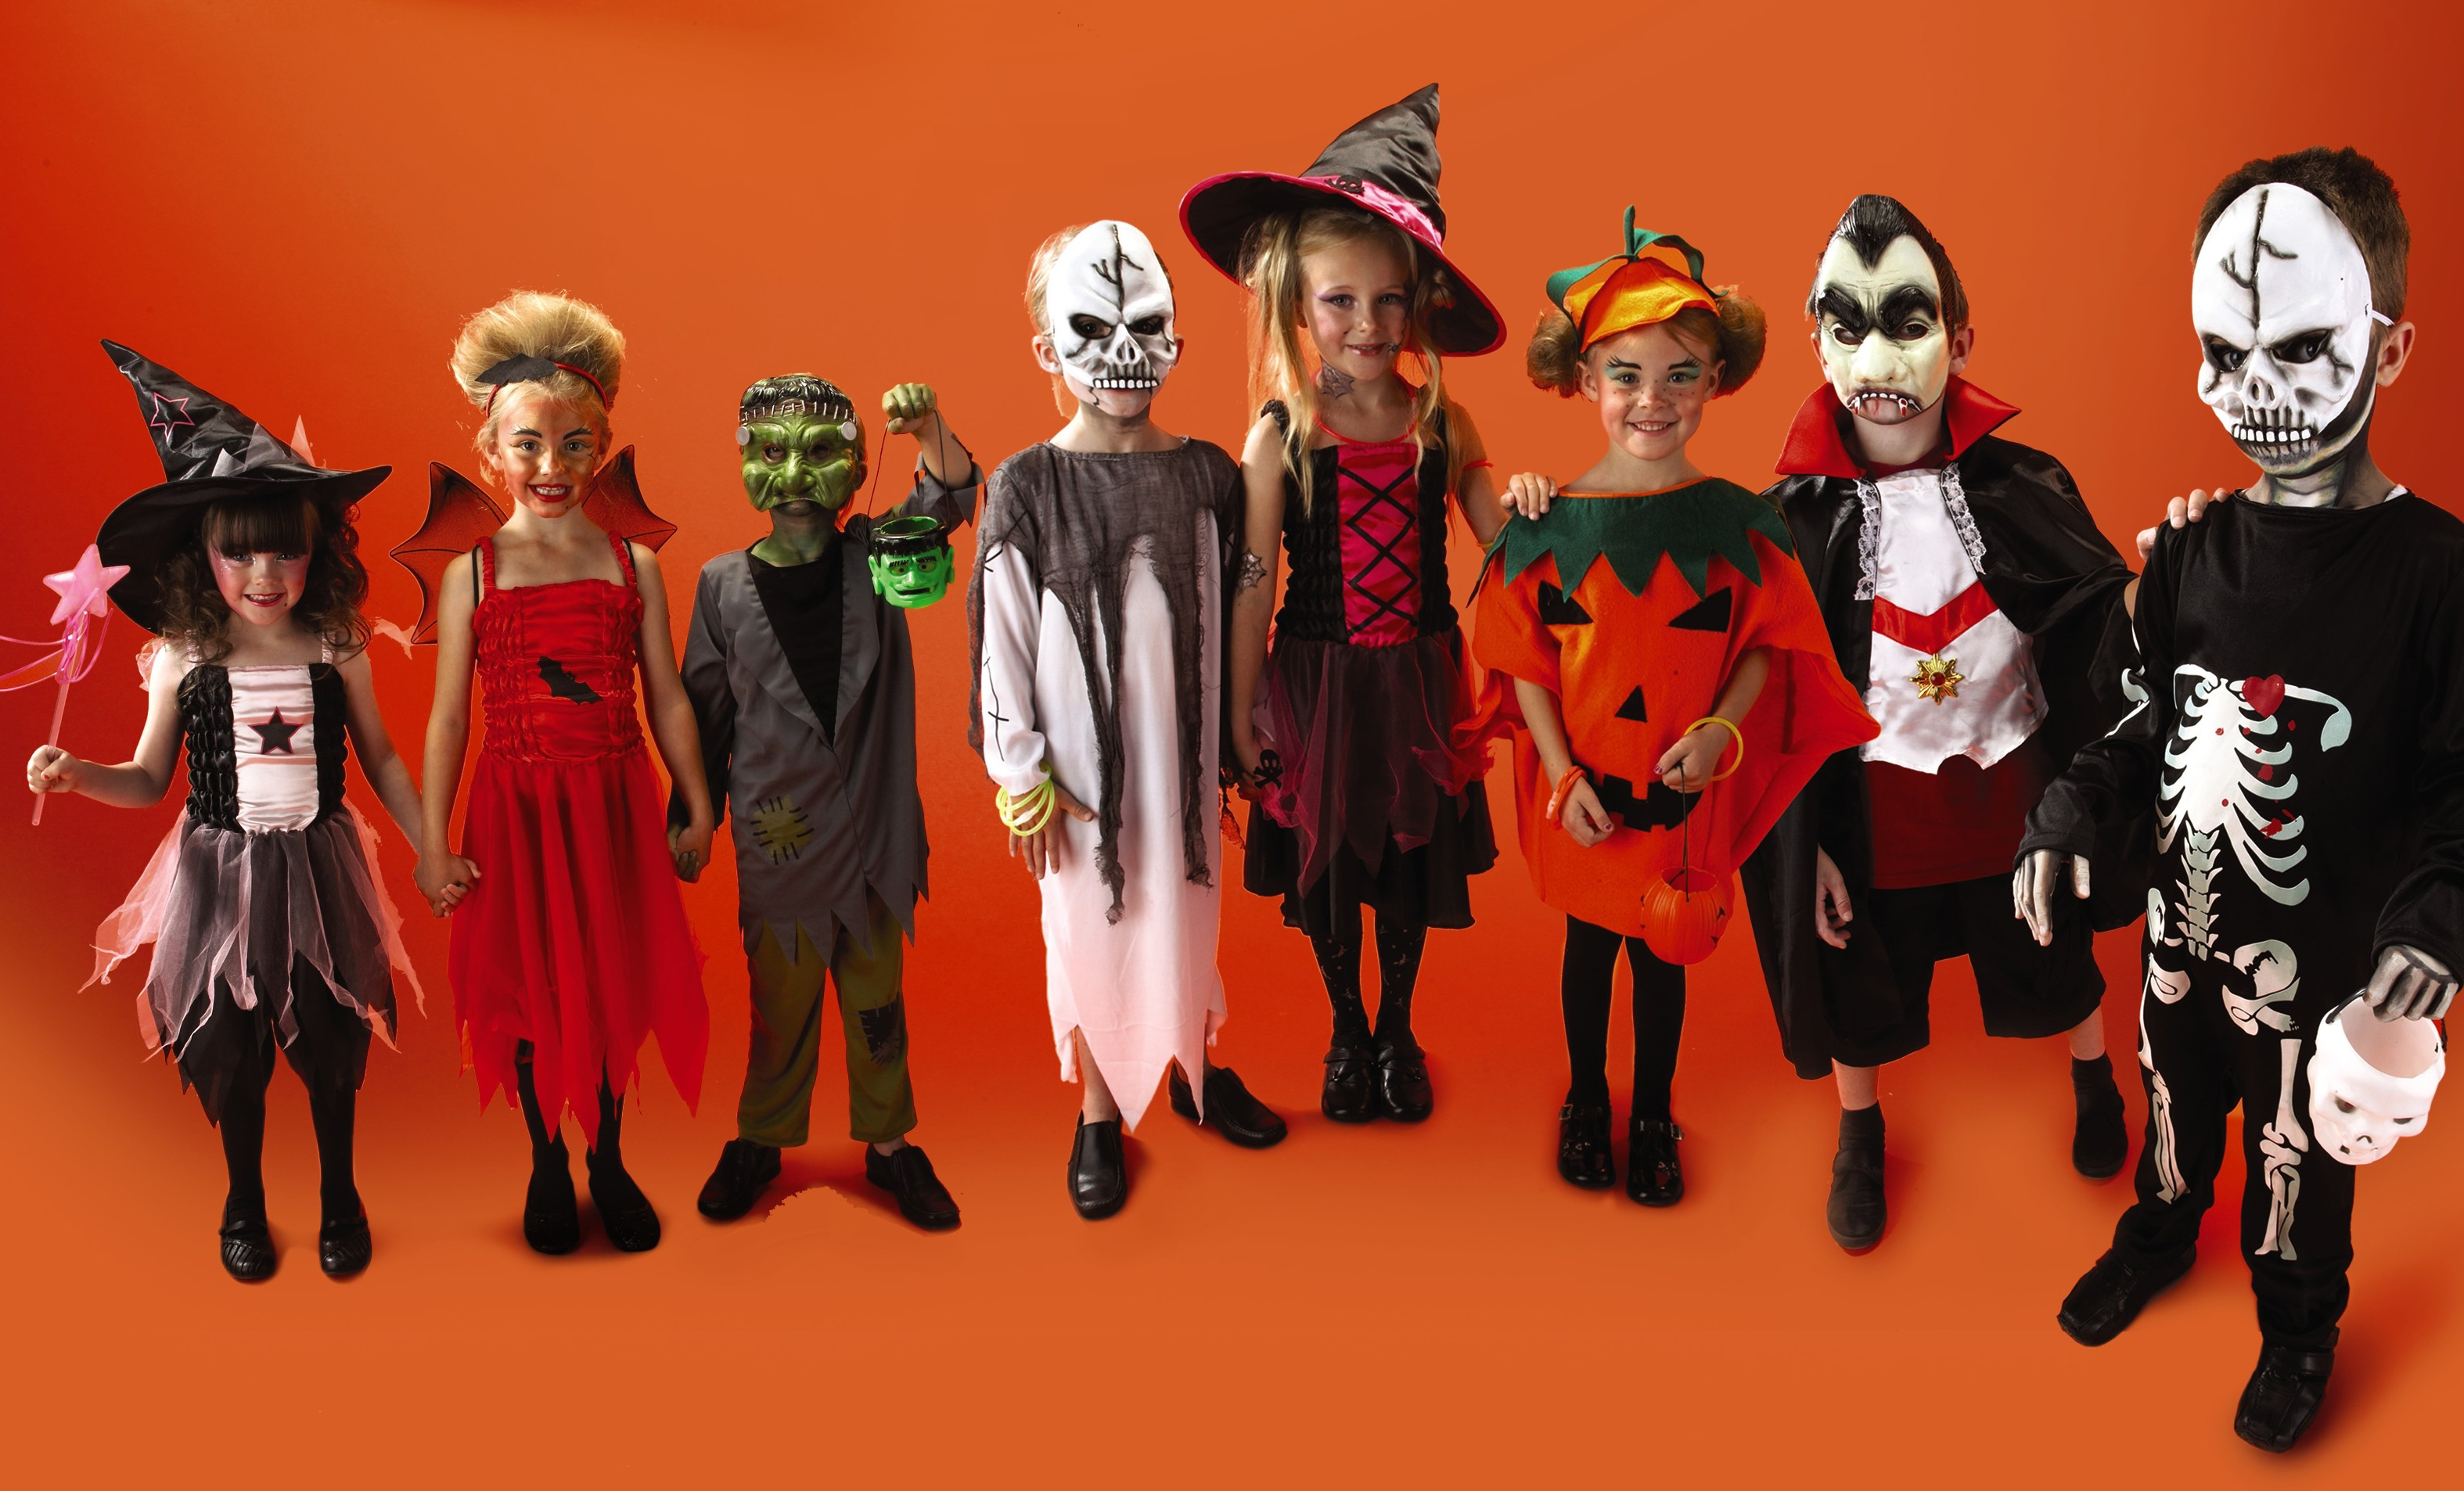 Witch Costumes – How to Look like an Evil Witch for Halloween